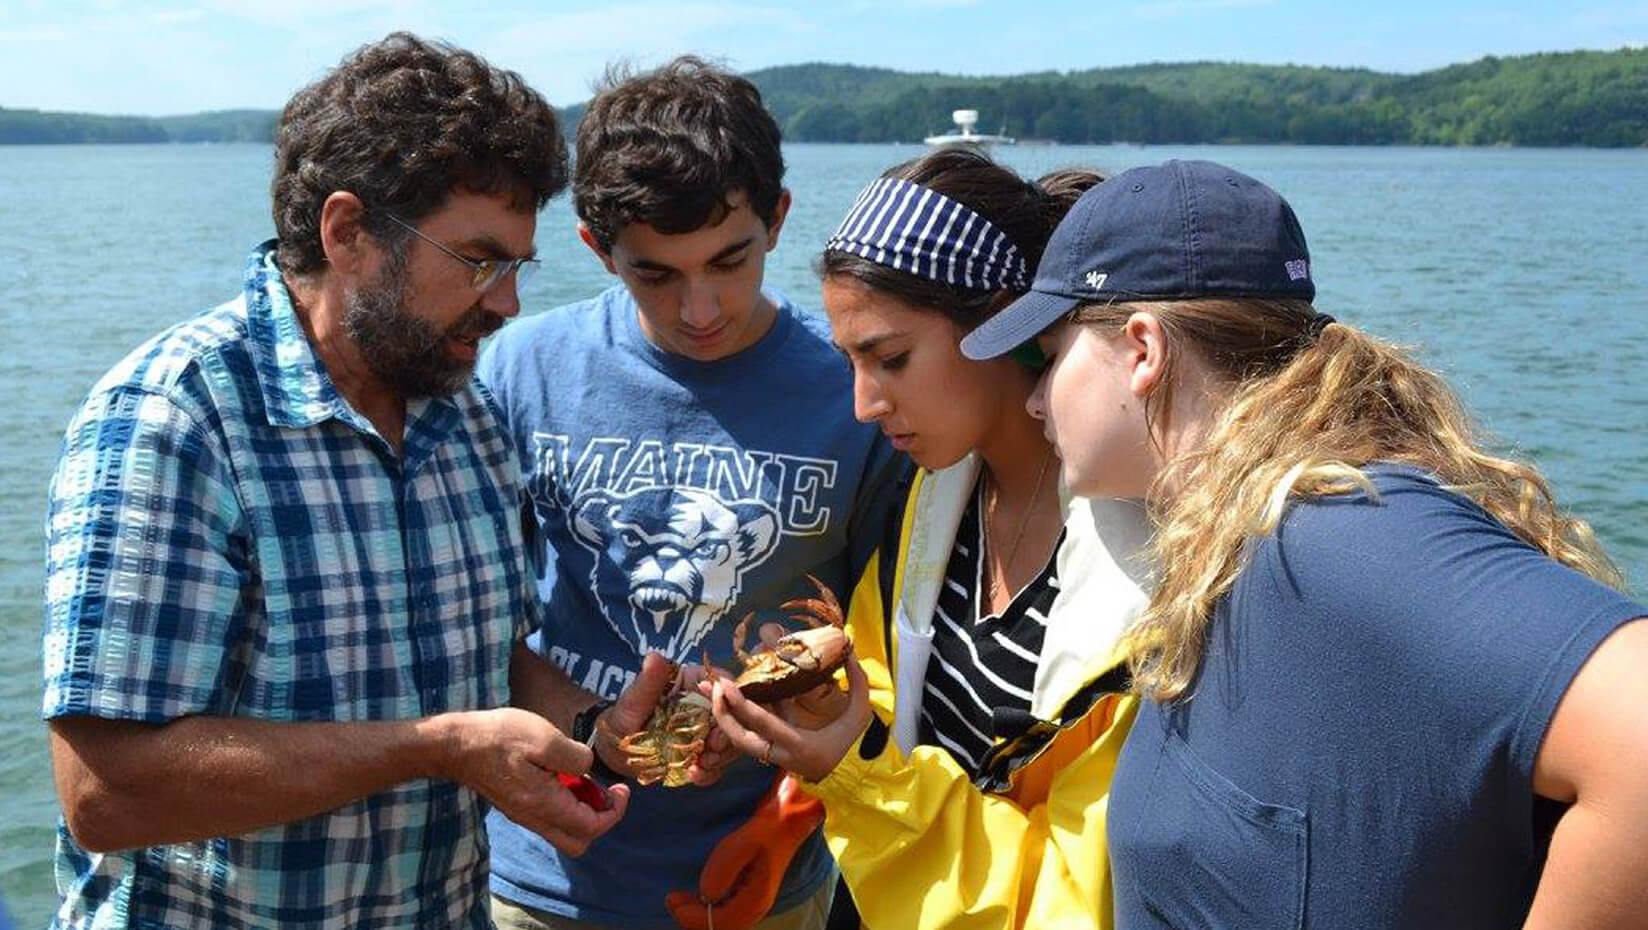 Marine sciences students attend boot camp